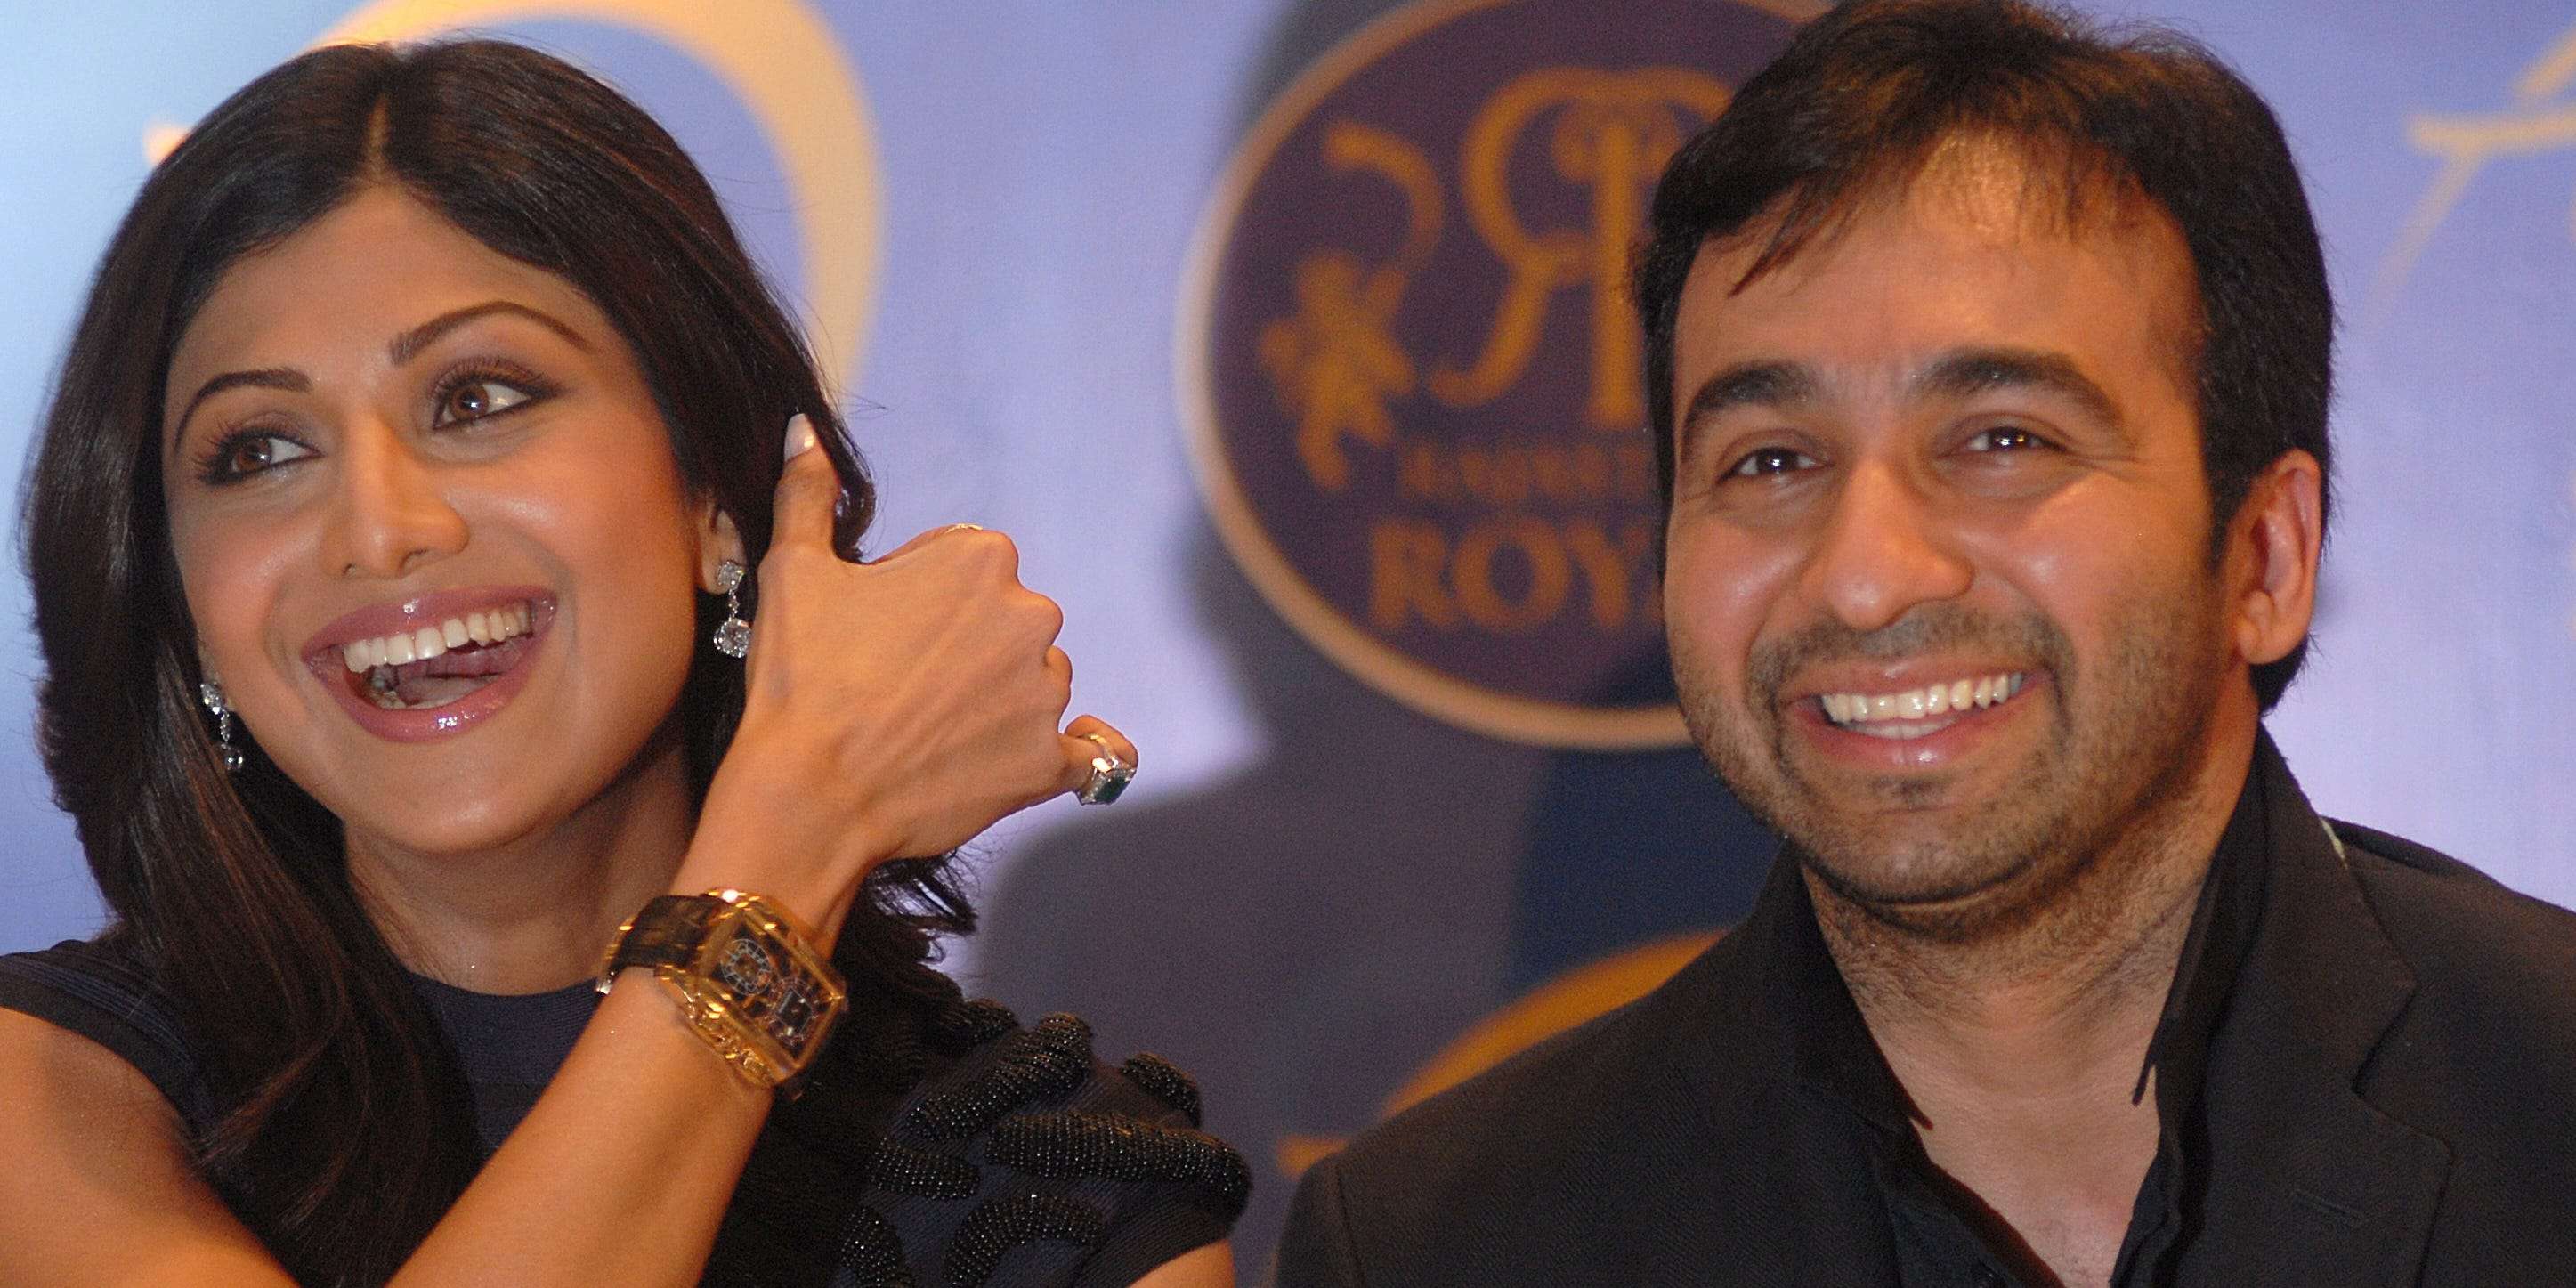 Millionaire married to Bollywood star is investigated for involvement in porn ring that coerced women into sex videos Business Insider India